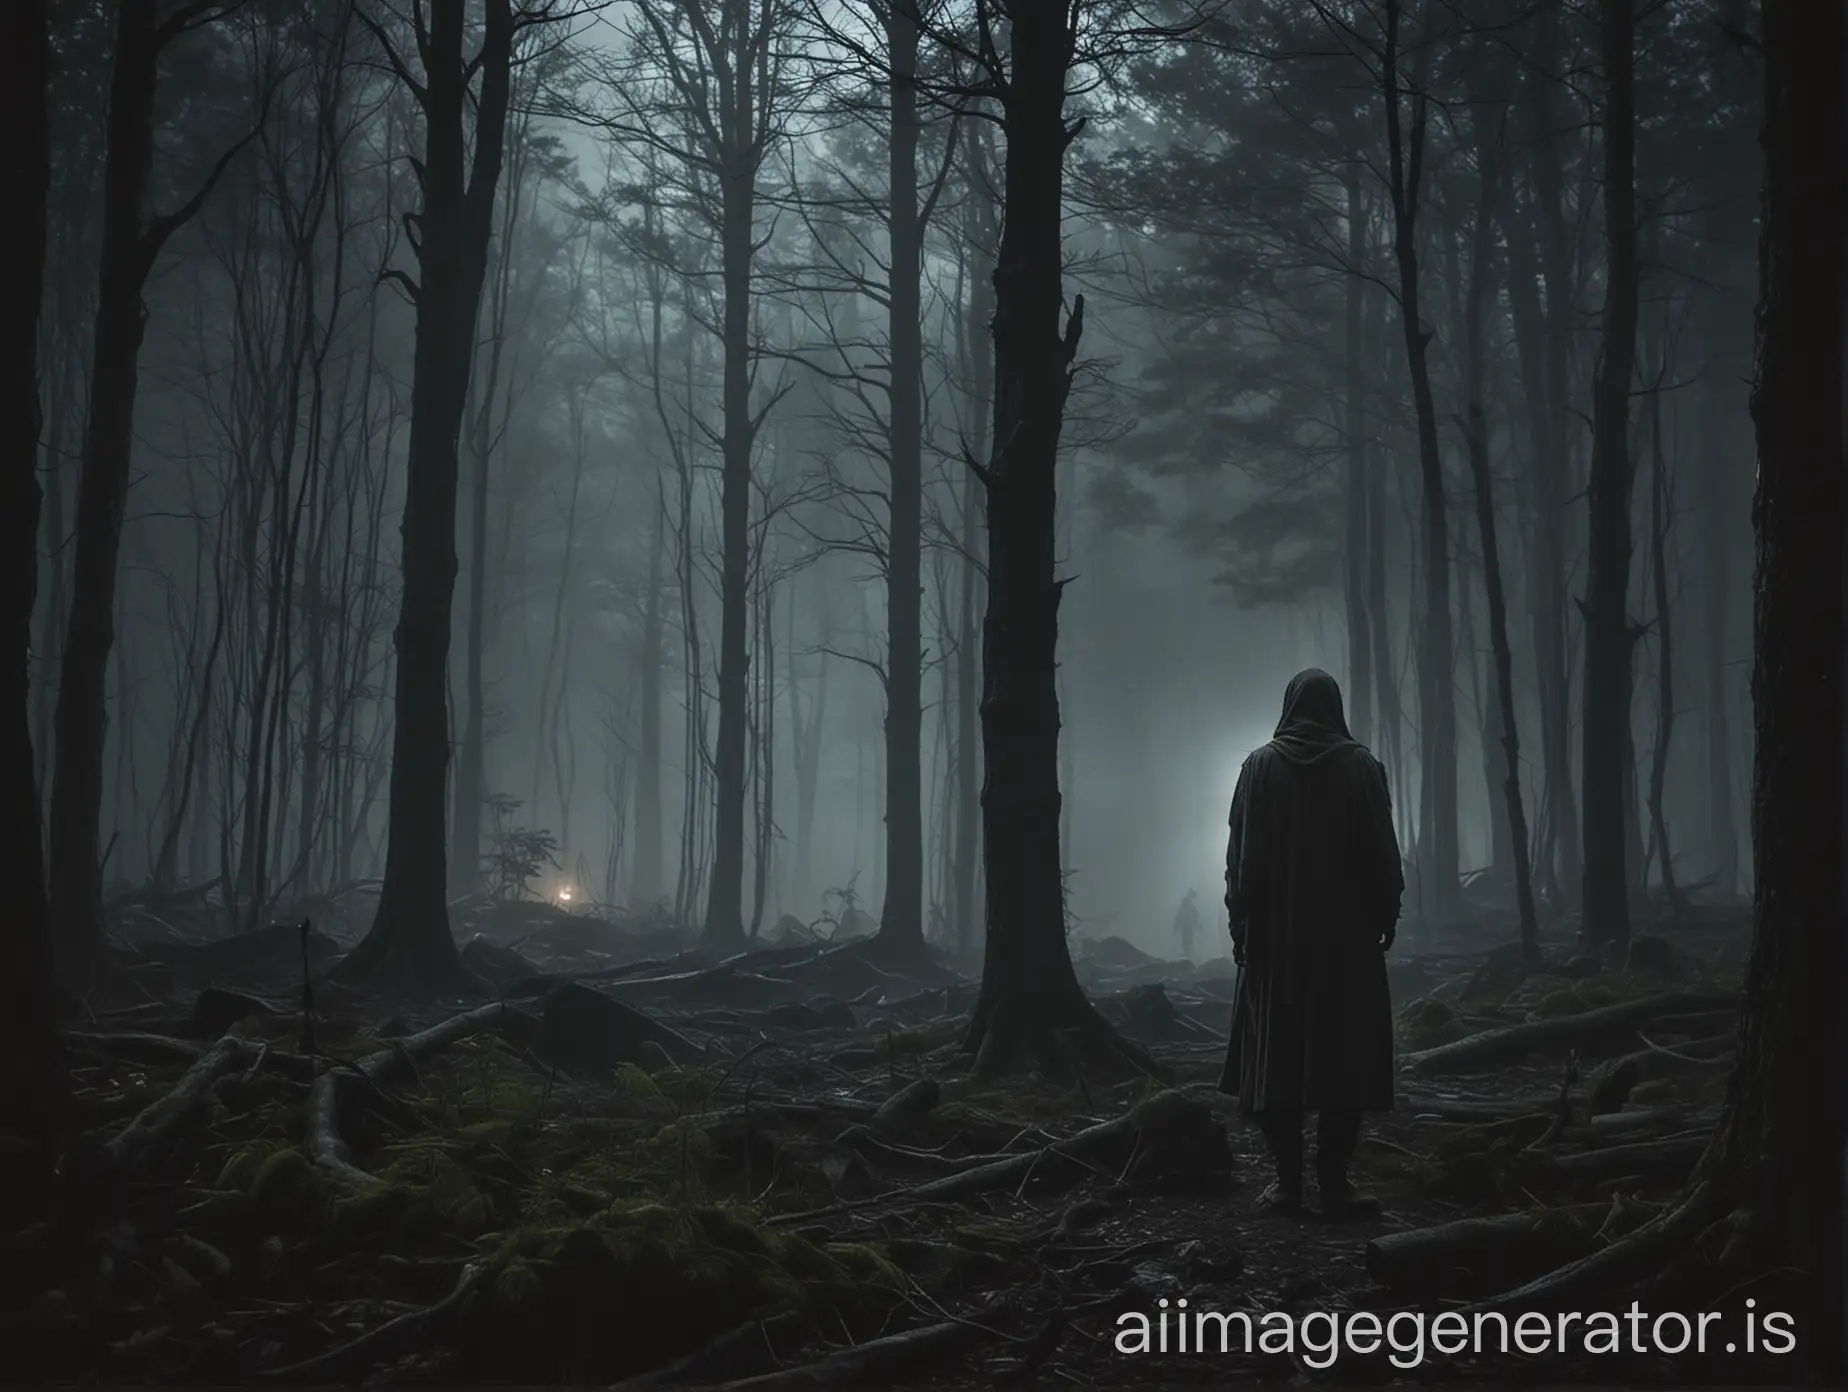 Mysterious-Figure-in-Moonlit-Forest-with-Hidden-Encampment